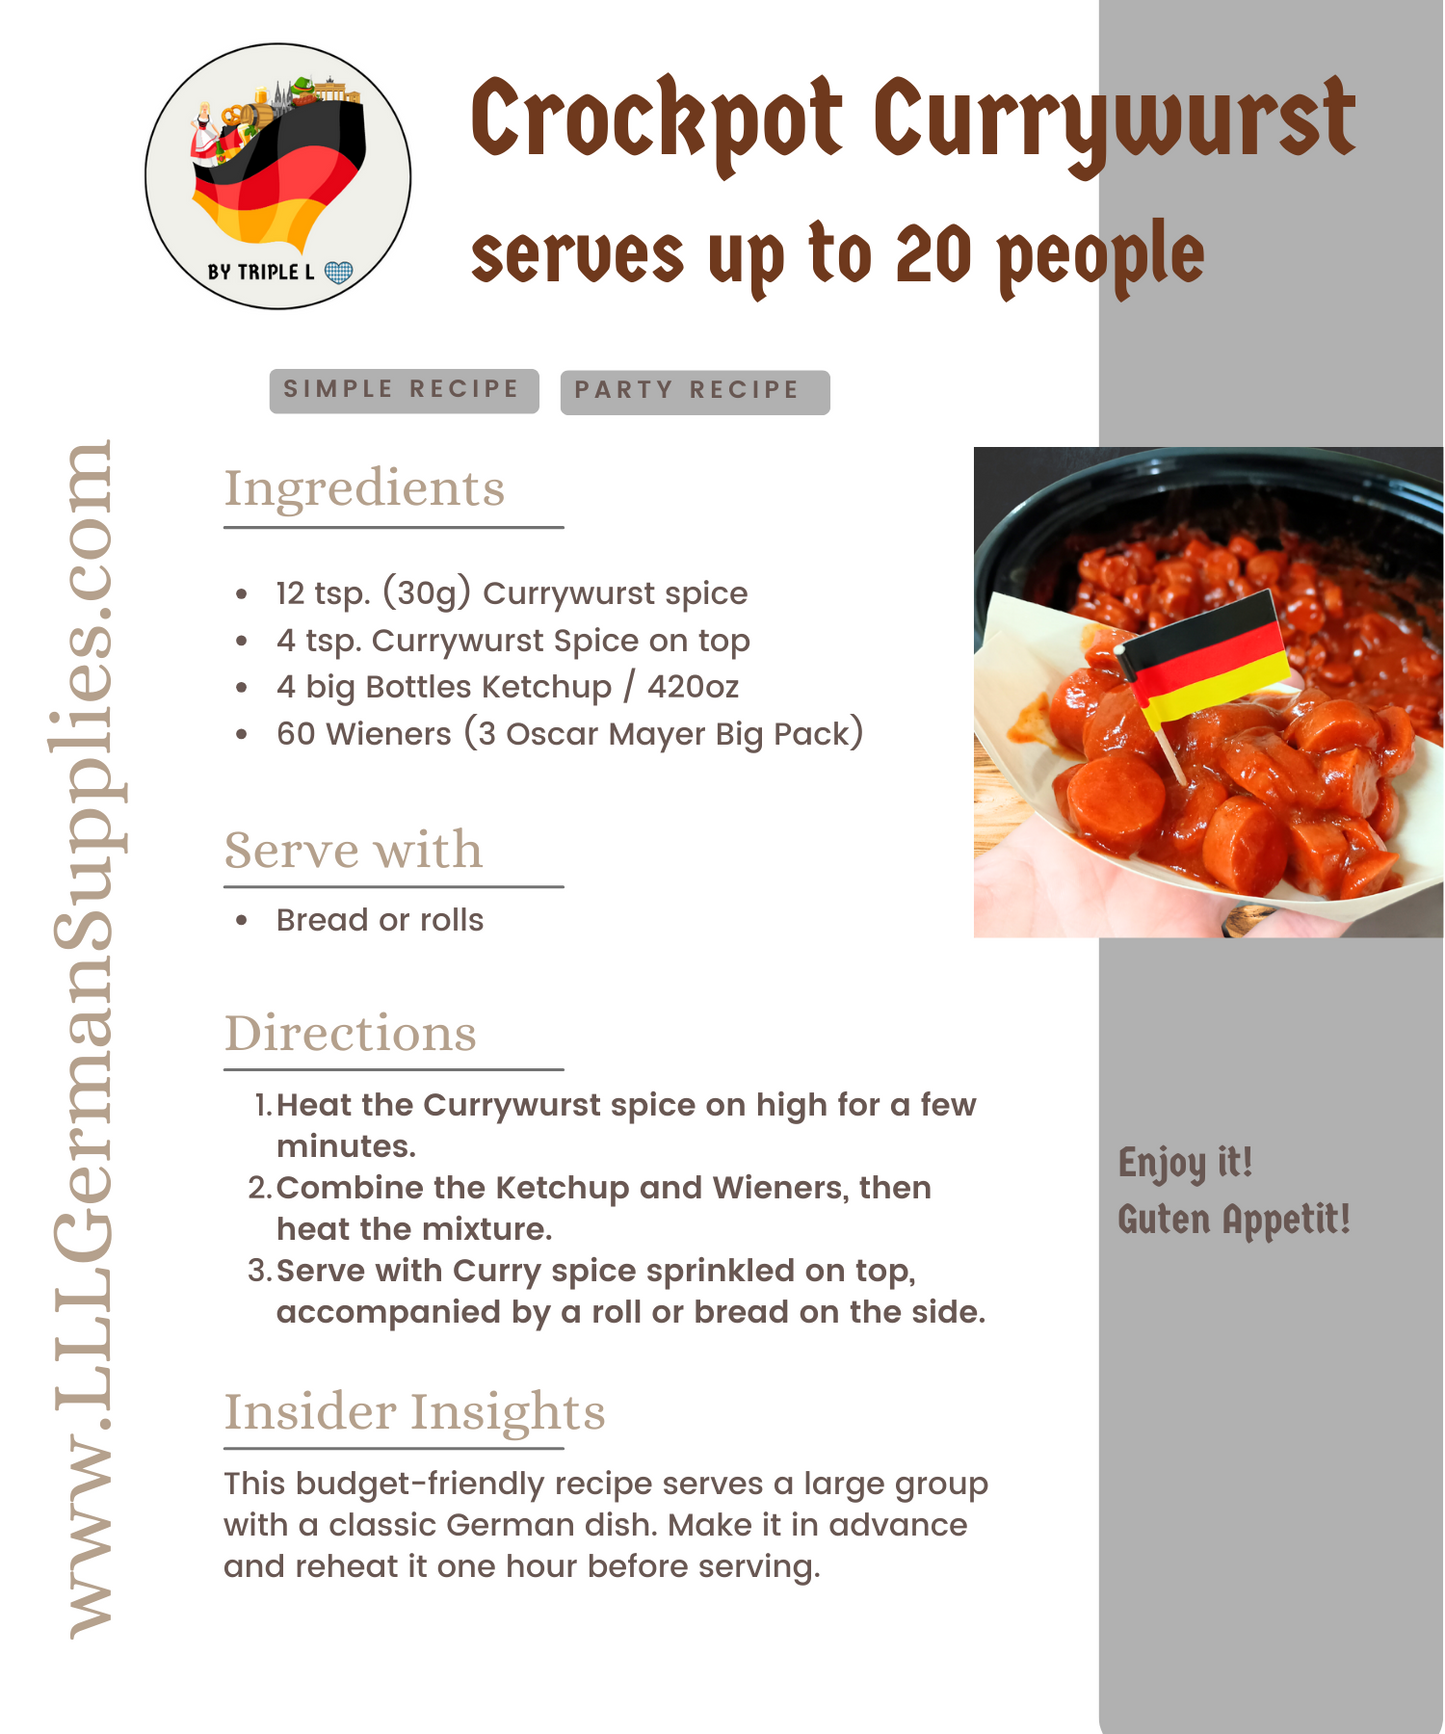 4x10g flavorful German Currywurst spice for four convenient recipes